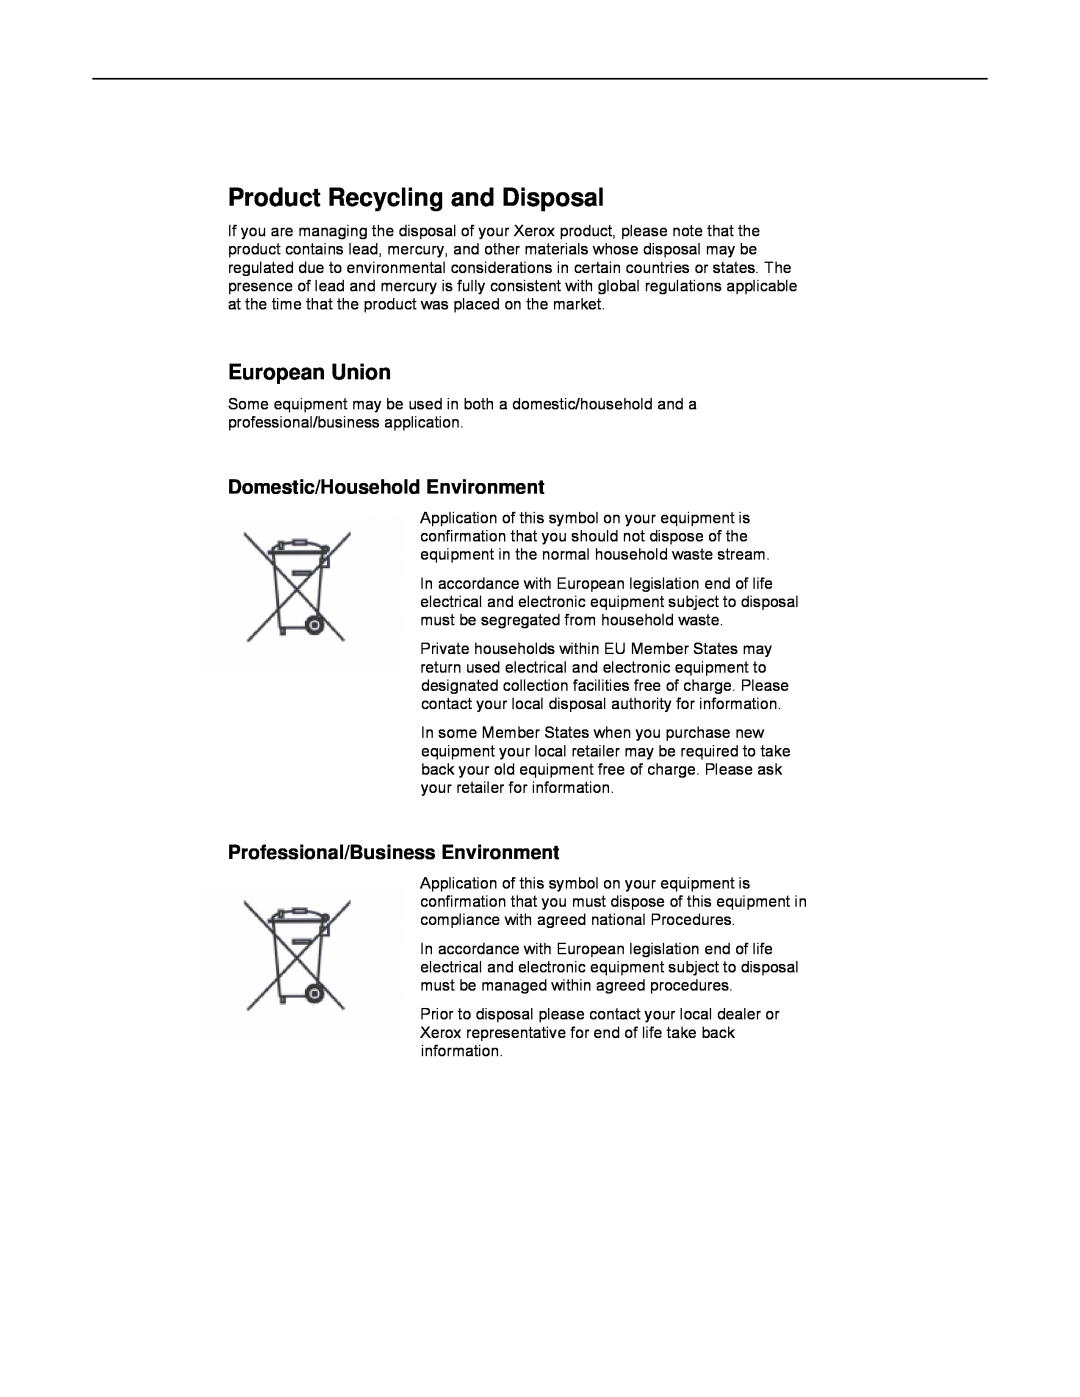 Xerox 701P46985 manual Product Recycling and Disposal, European Union, Domestic/Household Environment 